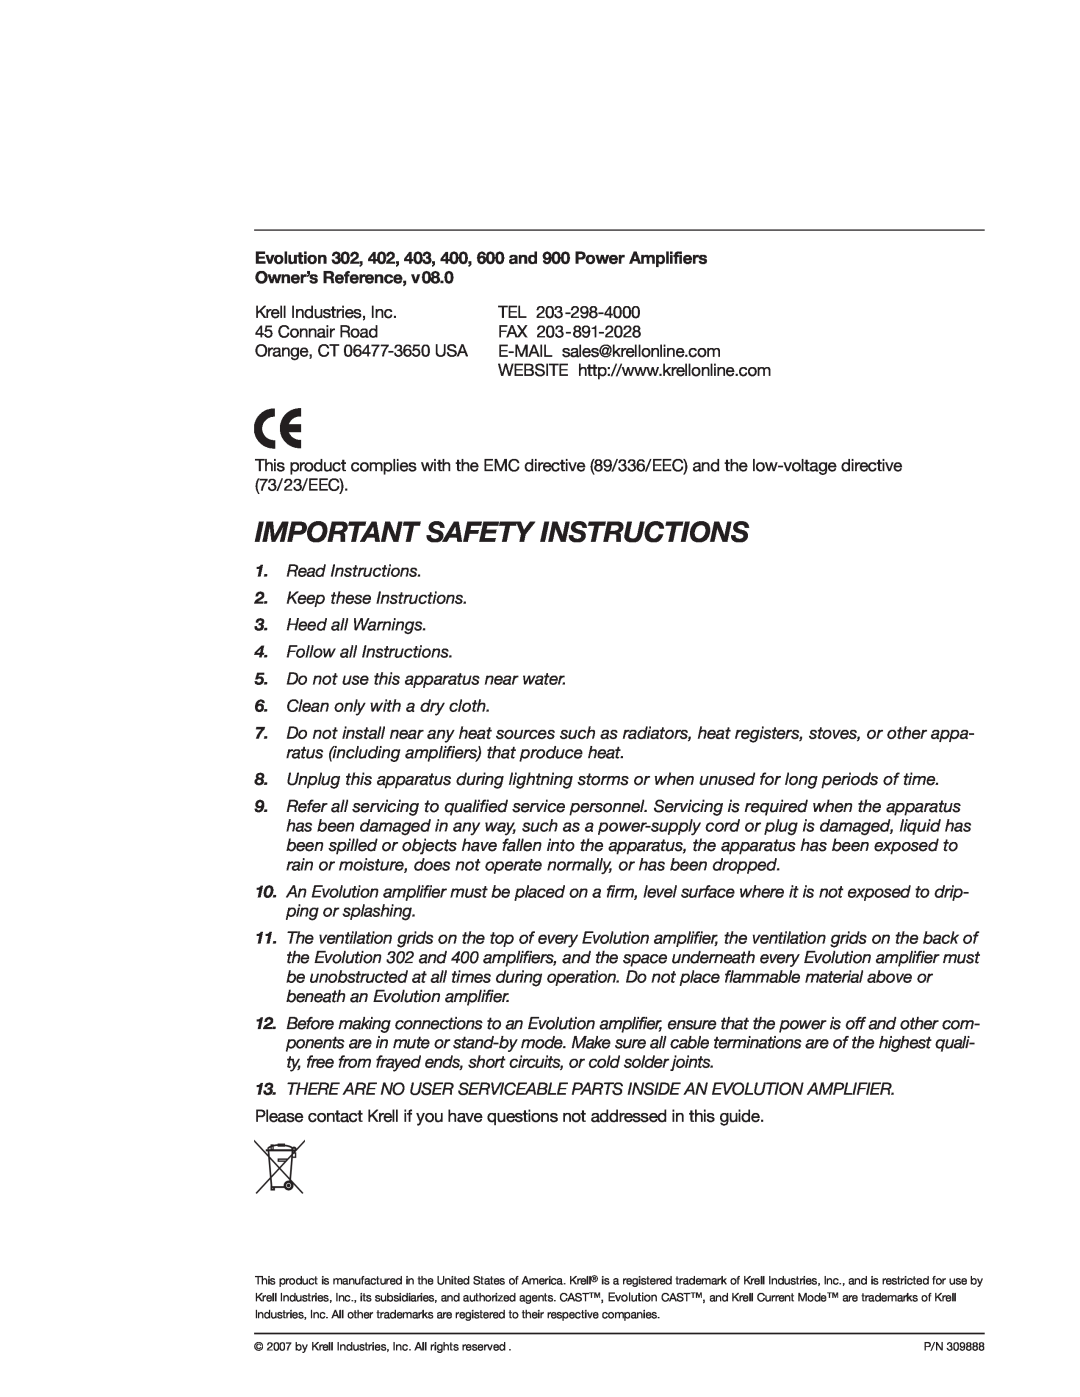 Krell Industries 400, Evolution 600, 900 manual Important Safety Instructions, Owner’s Reference 